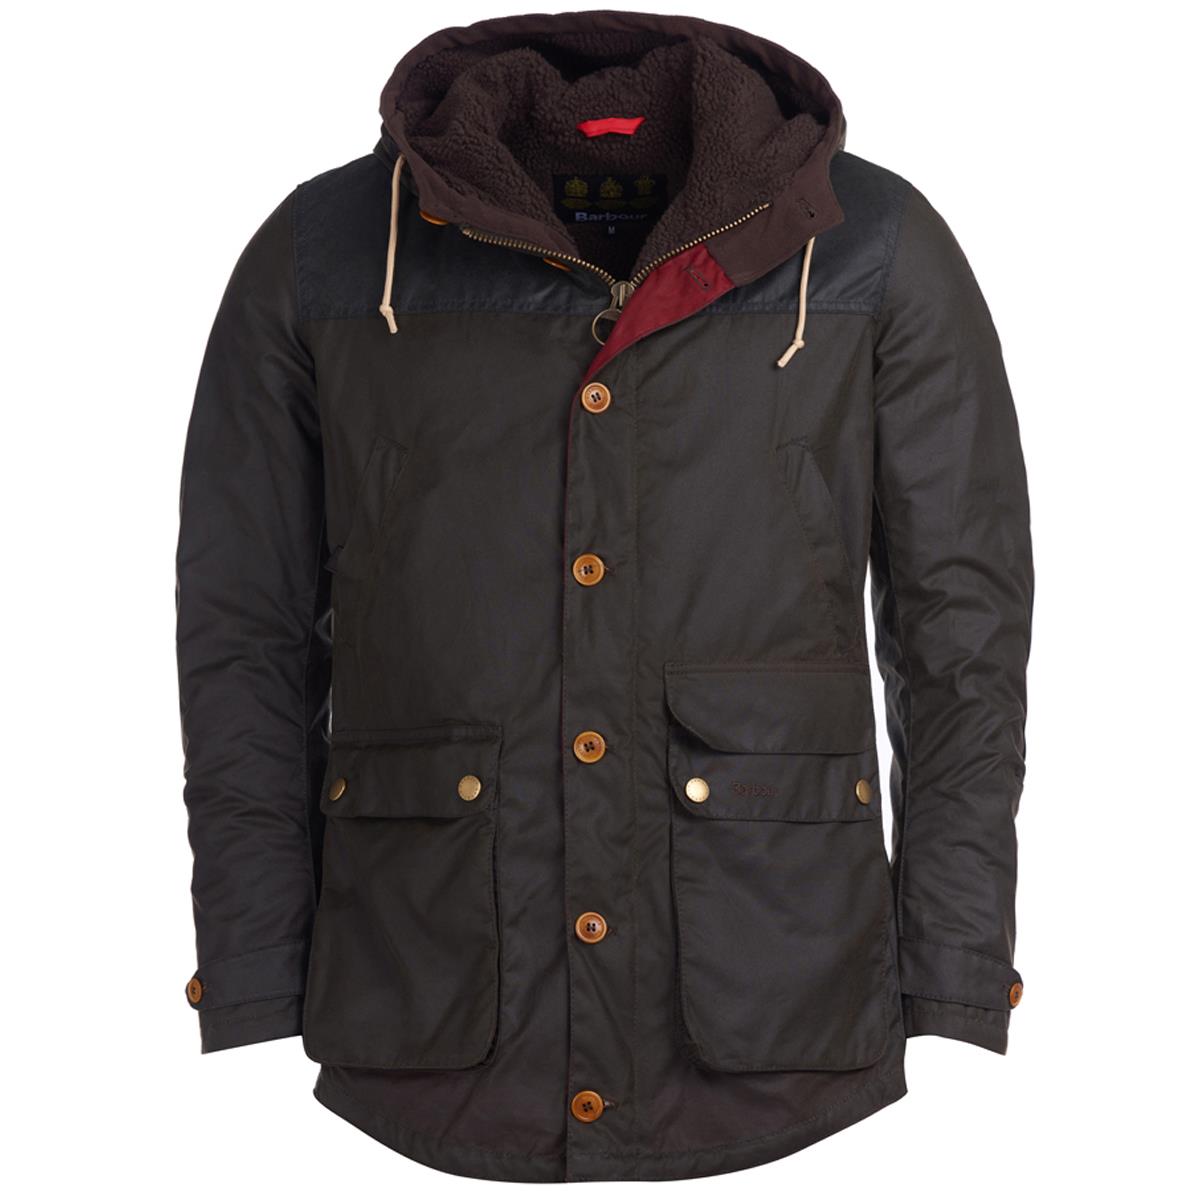 What is the policy for returning the Barbour Mens Game Parka Wax Jacket?